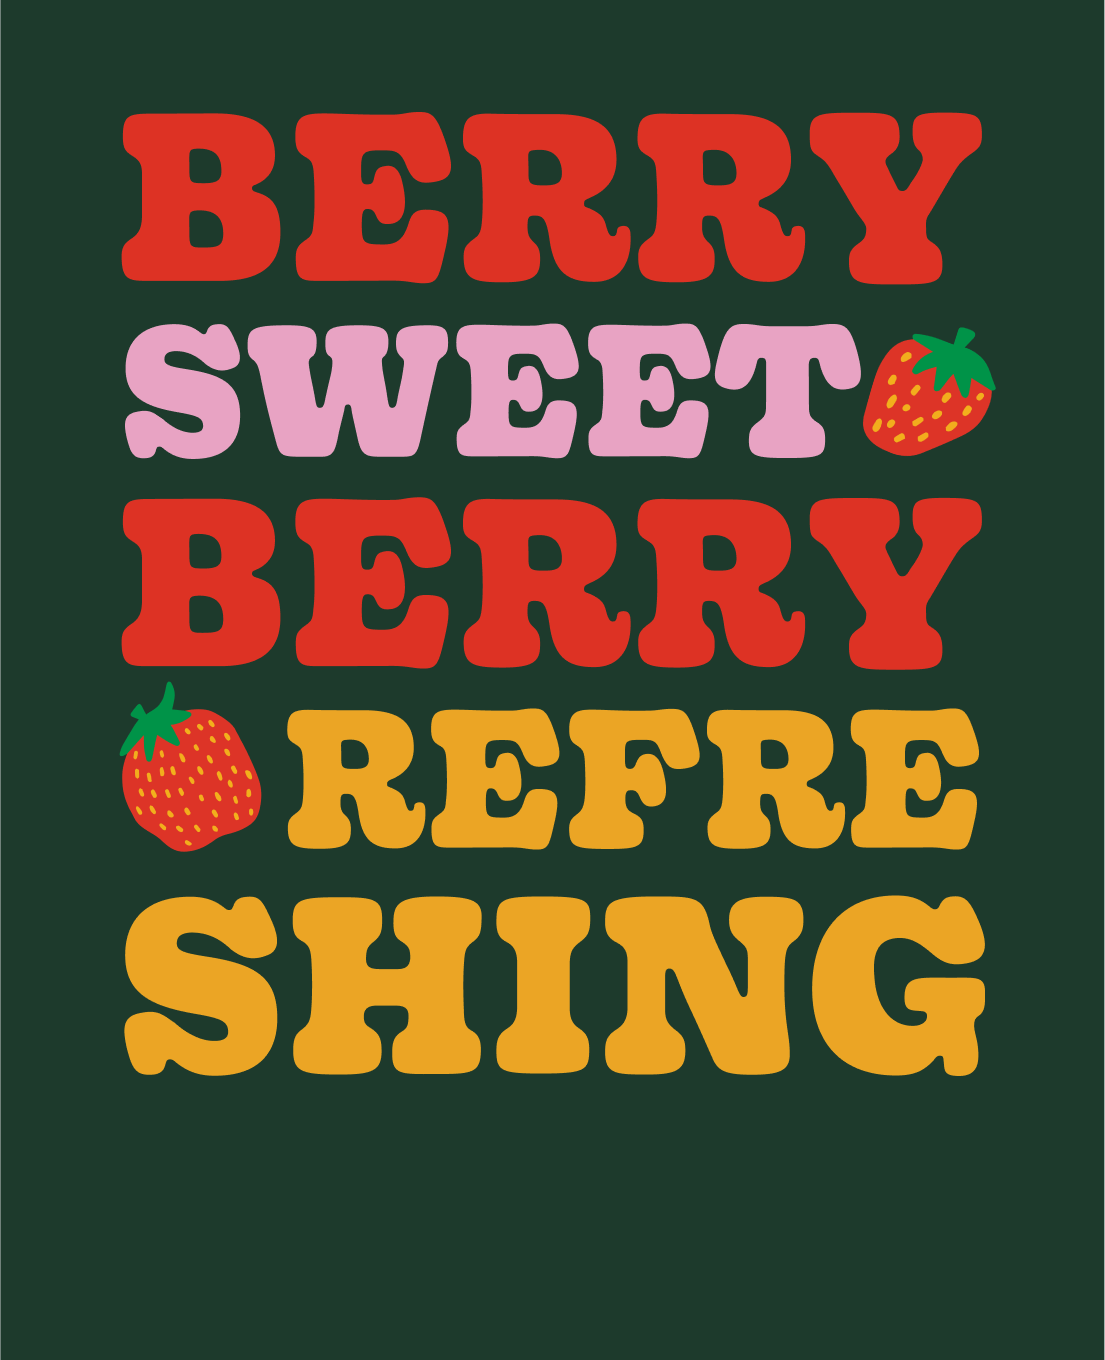 Black background with colorful font that says Berry Sweet Berry Refreshing. Words are in red, pink, and yellow. Two graphic strawberries are on the image as well.